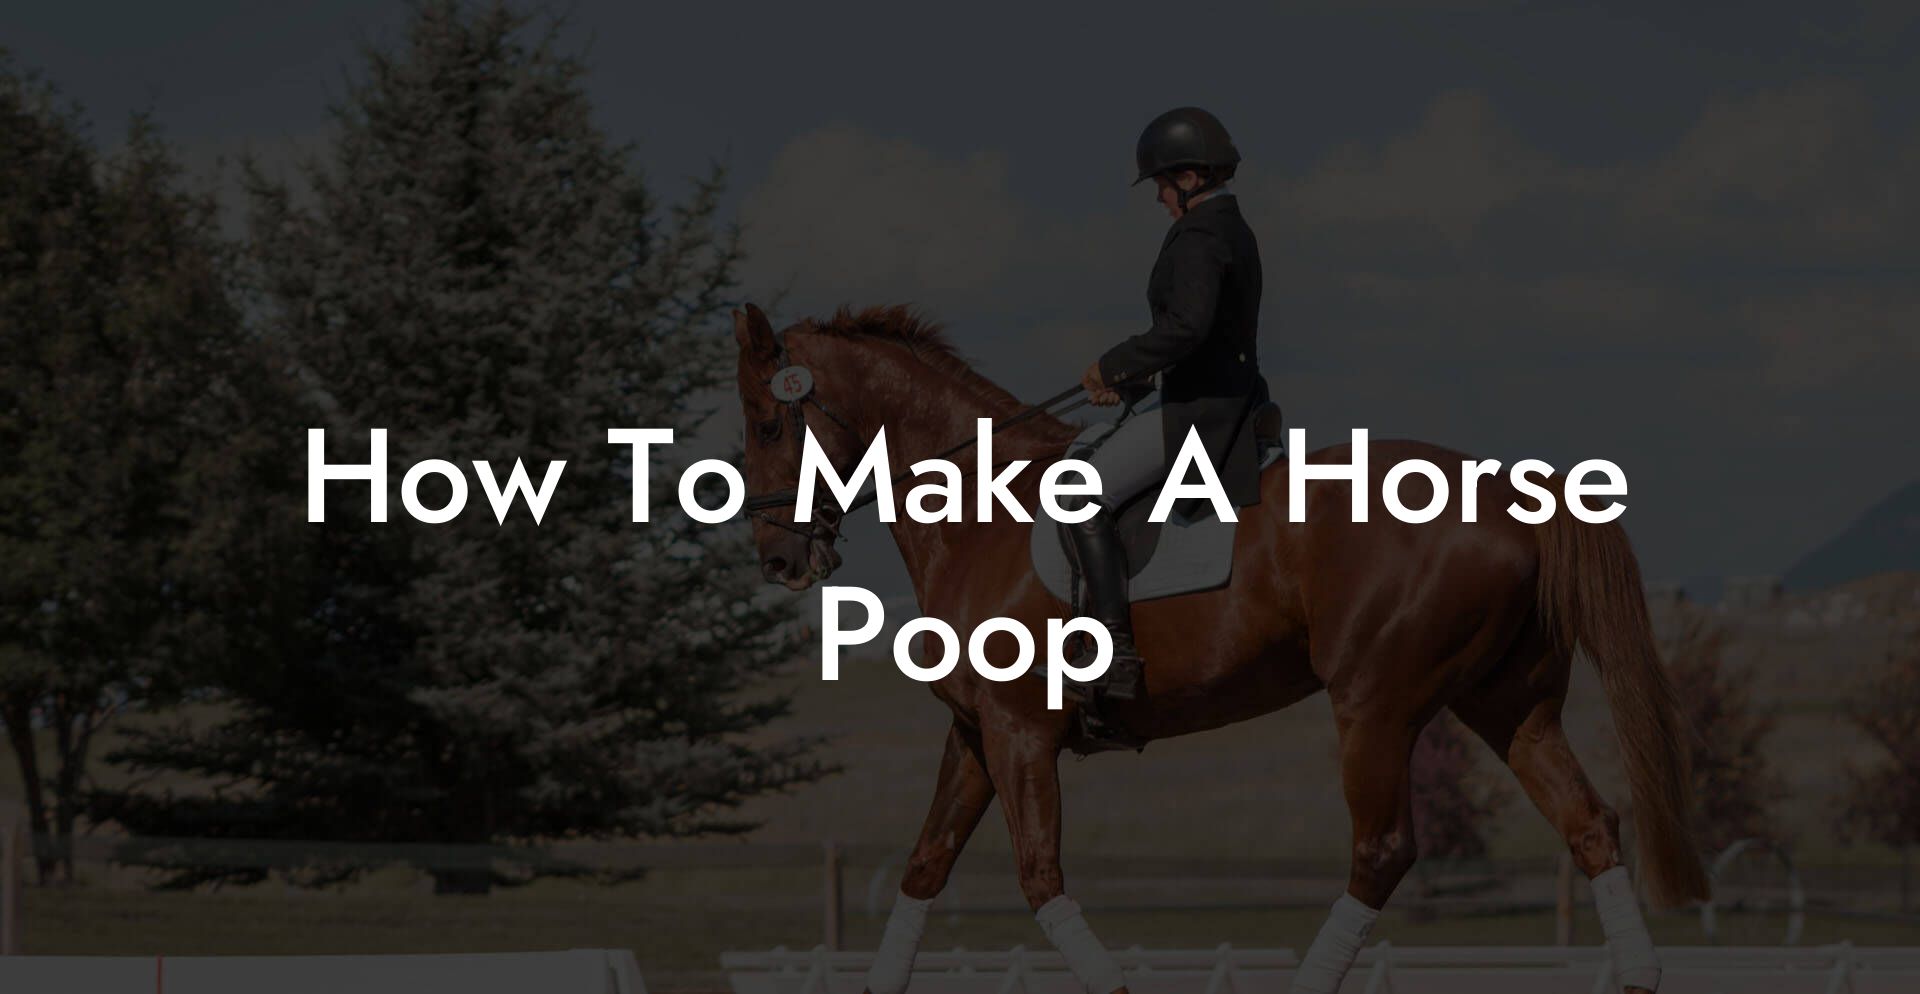 How To Make A Horse Poop